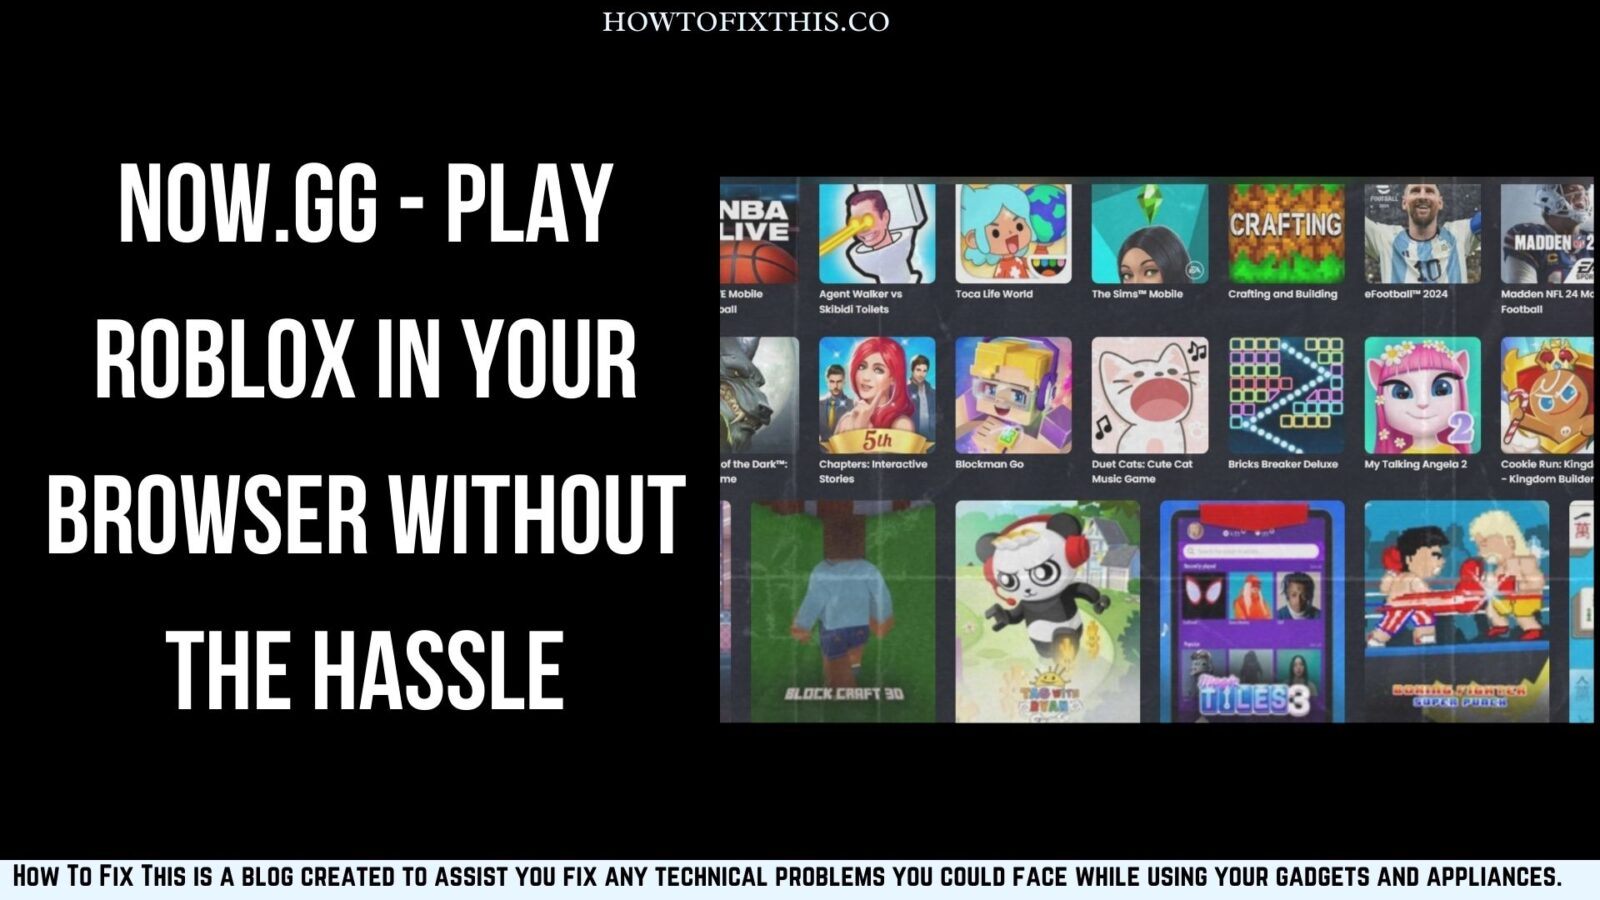 Now.gg Play Roblox in Your Browser Without the Hassle